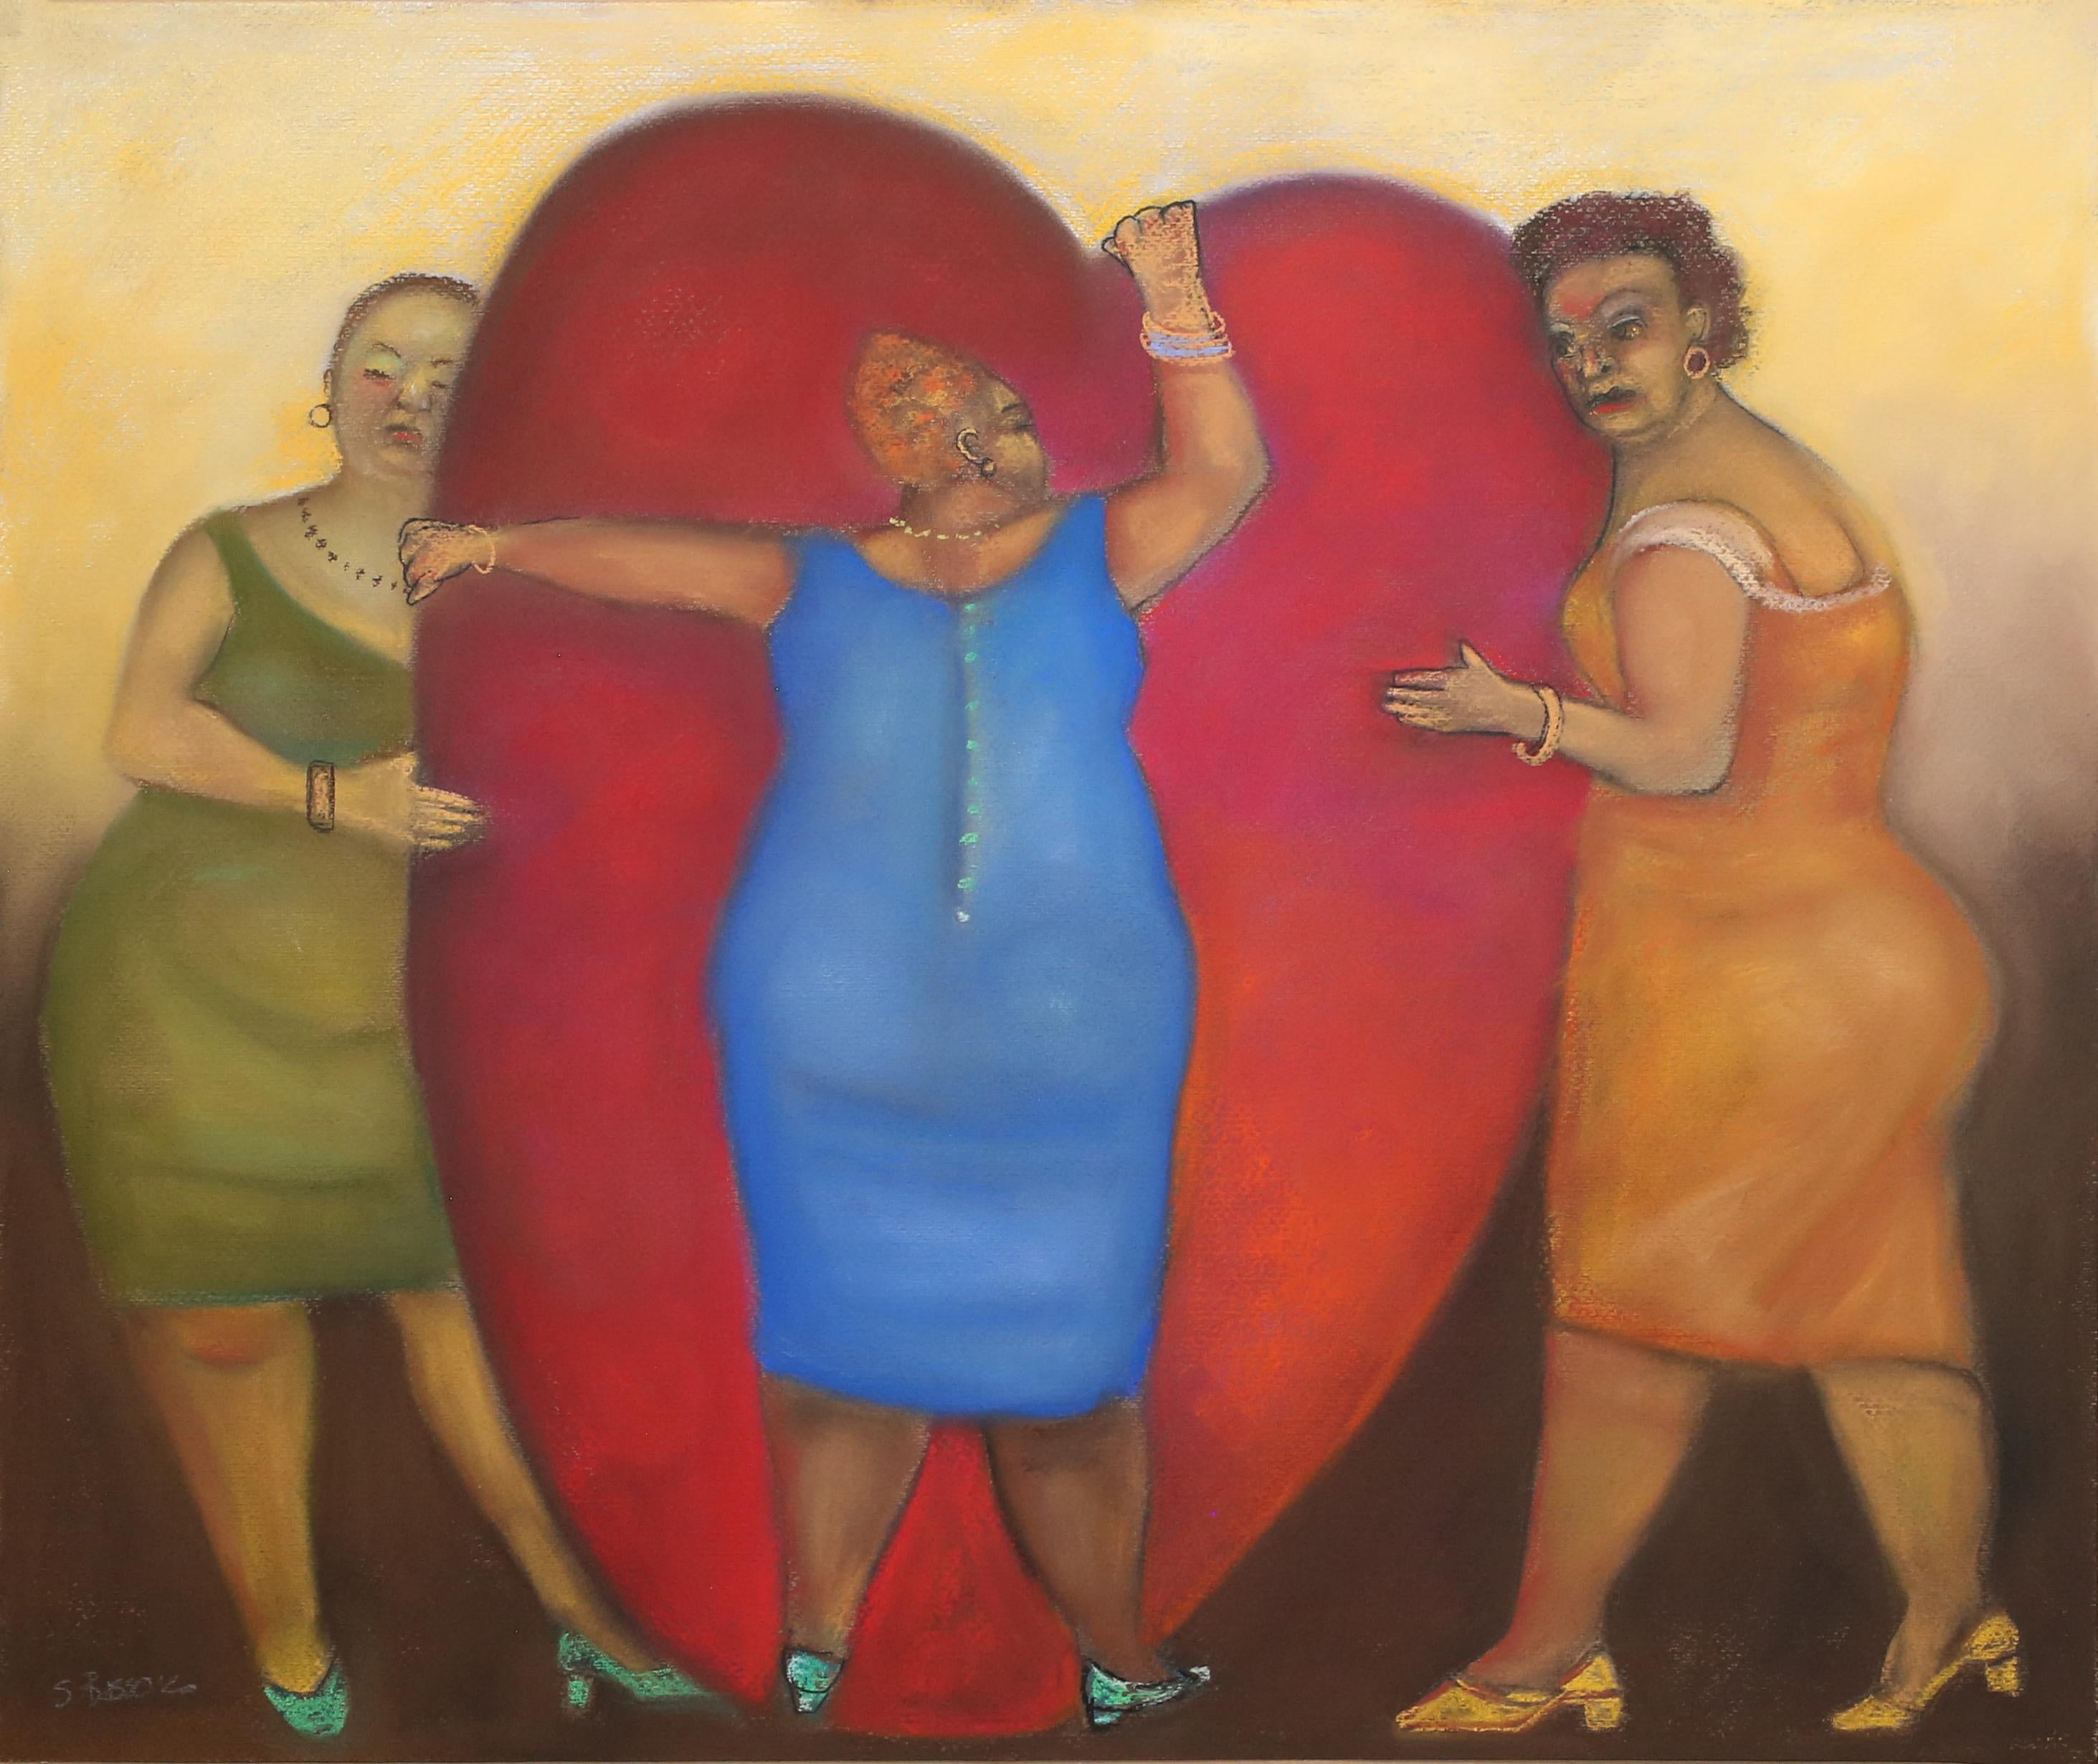 Big Hearted Women bright colors valentine heart love theme large light humor - Art by Stephen Basso